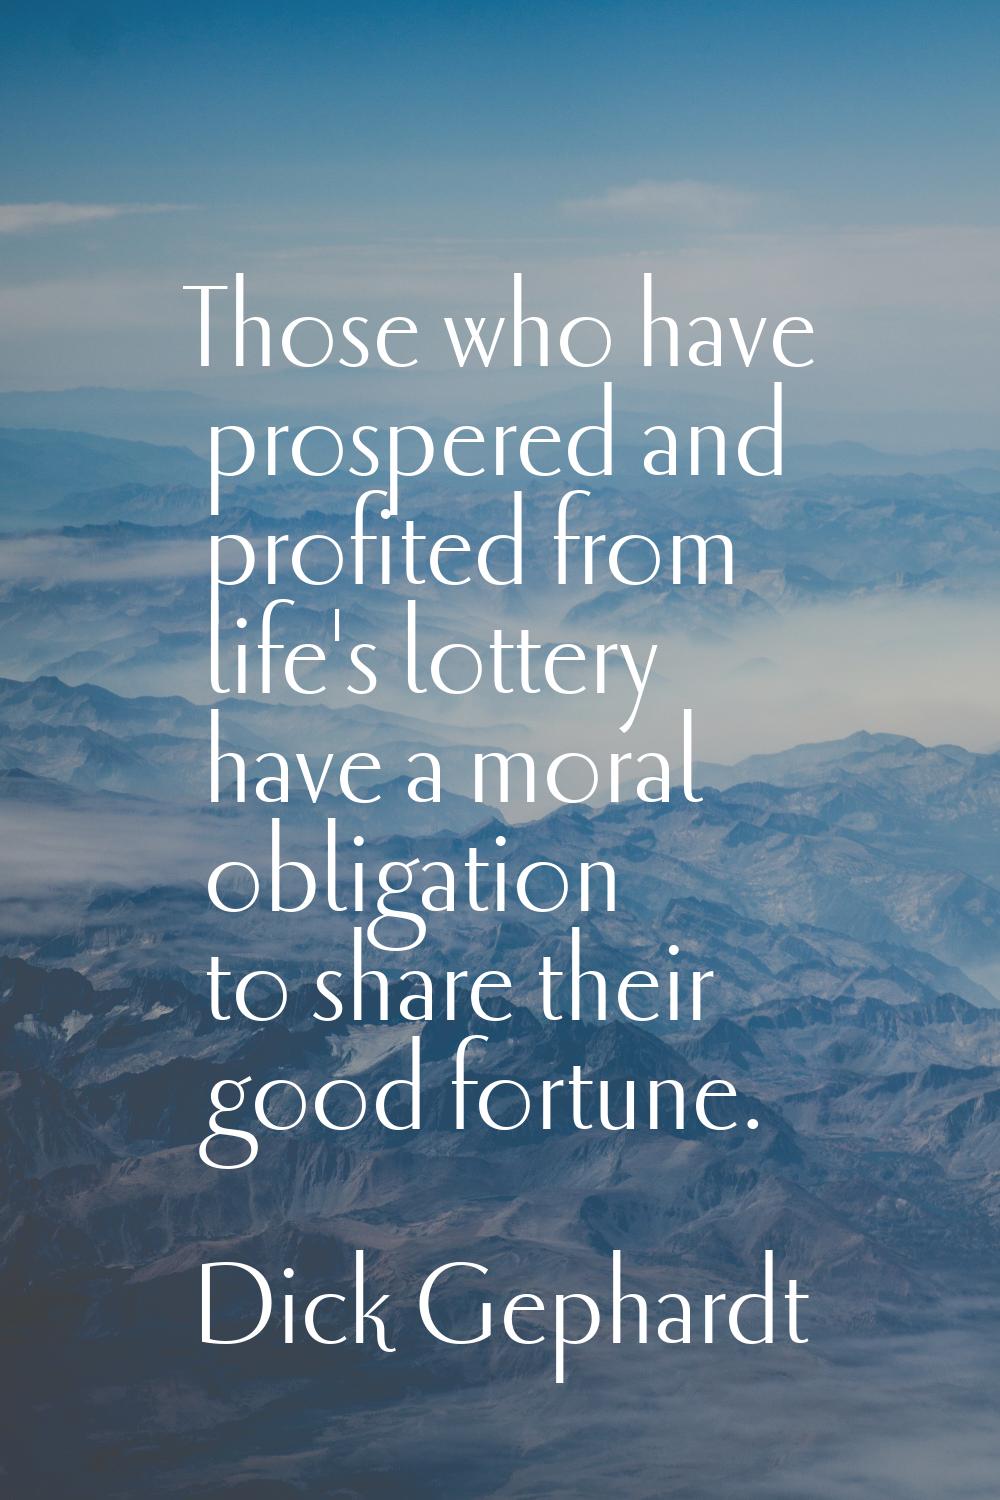 Those who have prospered and profited from life's lottery have a moral obligation to share their go